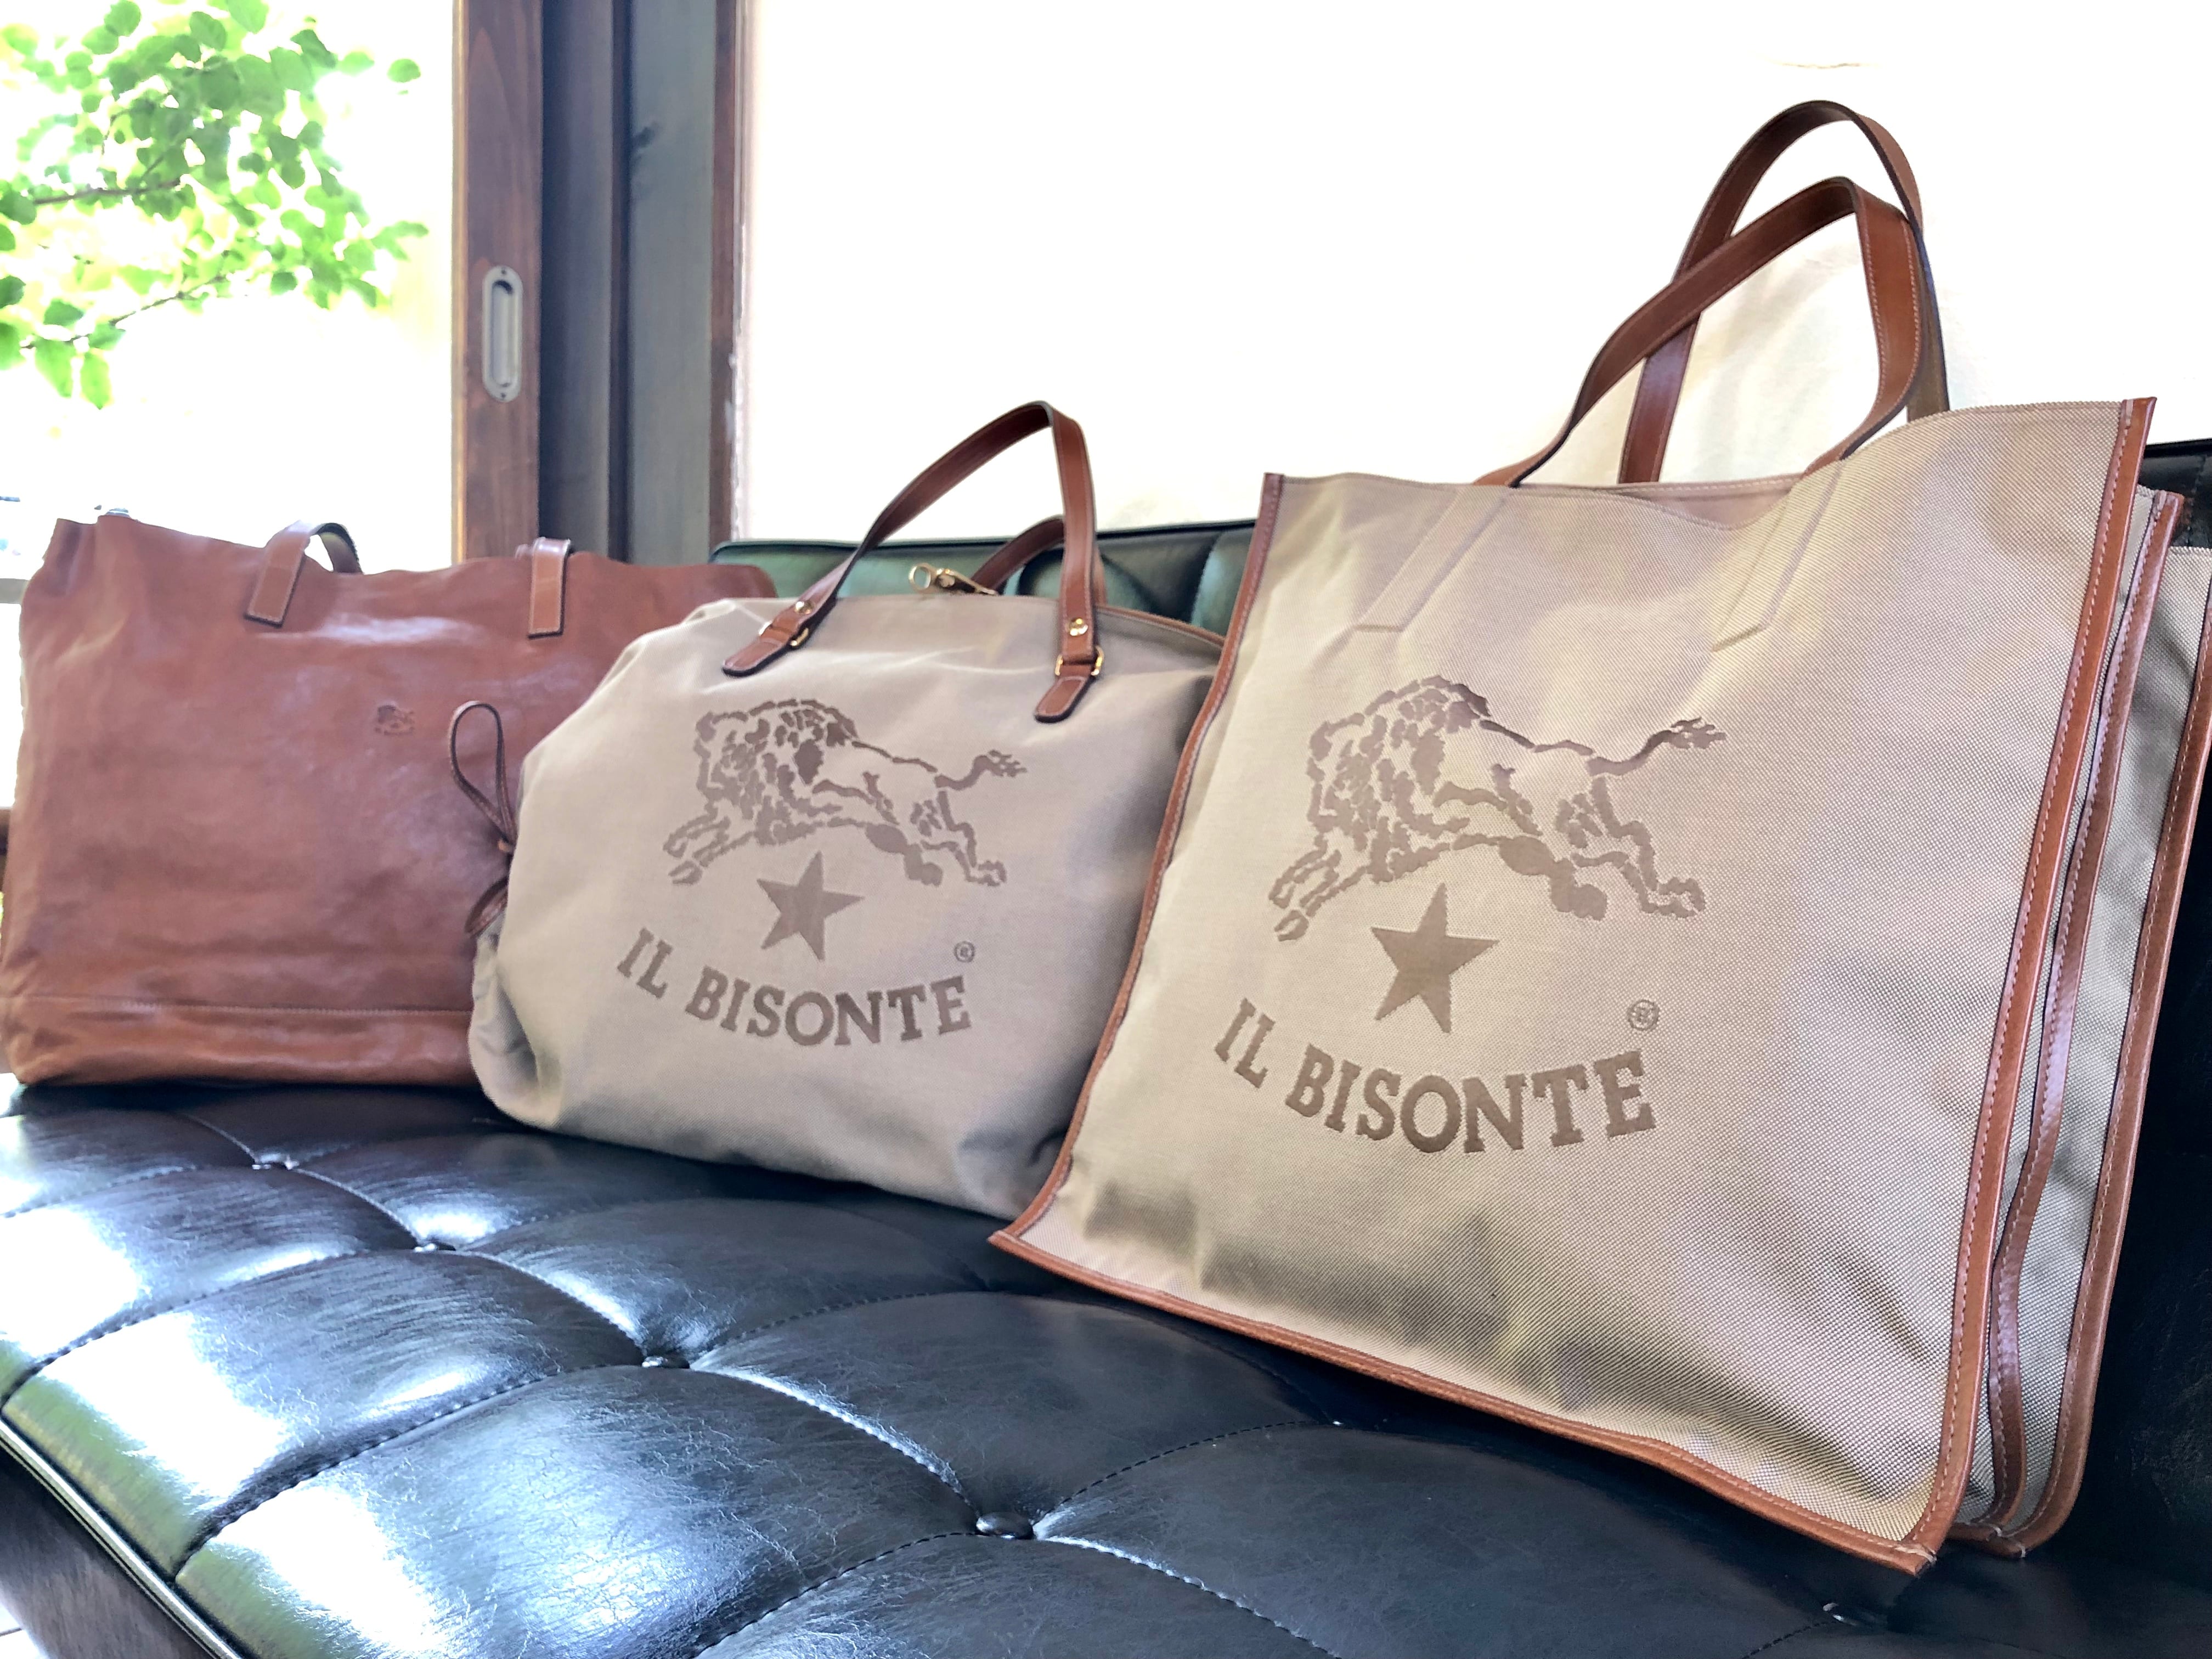 IL BISONTE 長財布 トートバッグ 2点セット